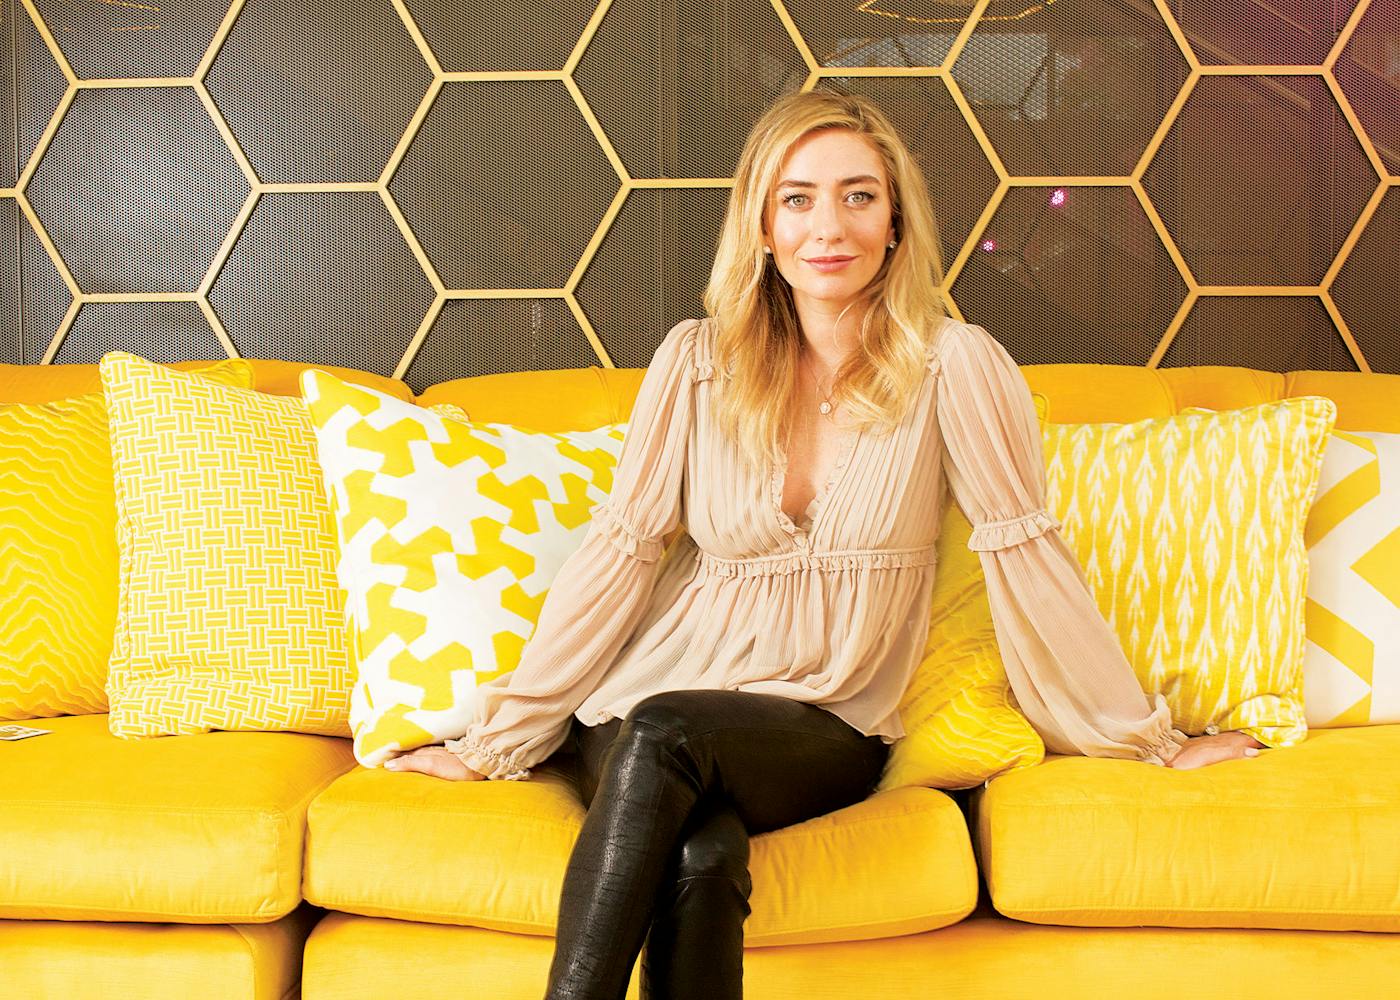 Blonde Teen Sucks Cock - How Whitney Wolfe Herd Changed the Dating Game â€“ Texas Monthly